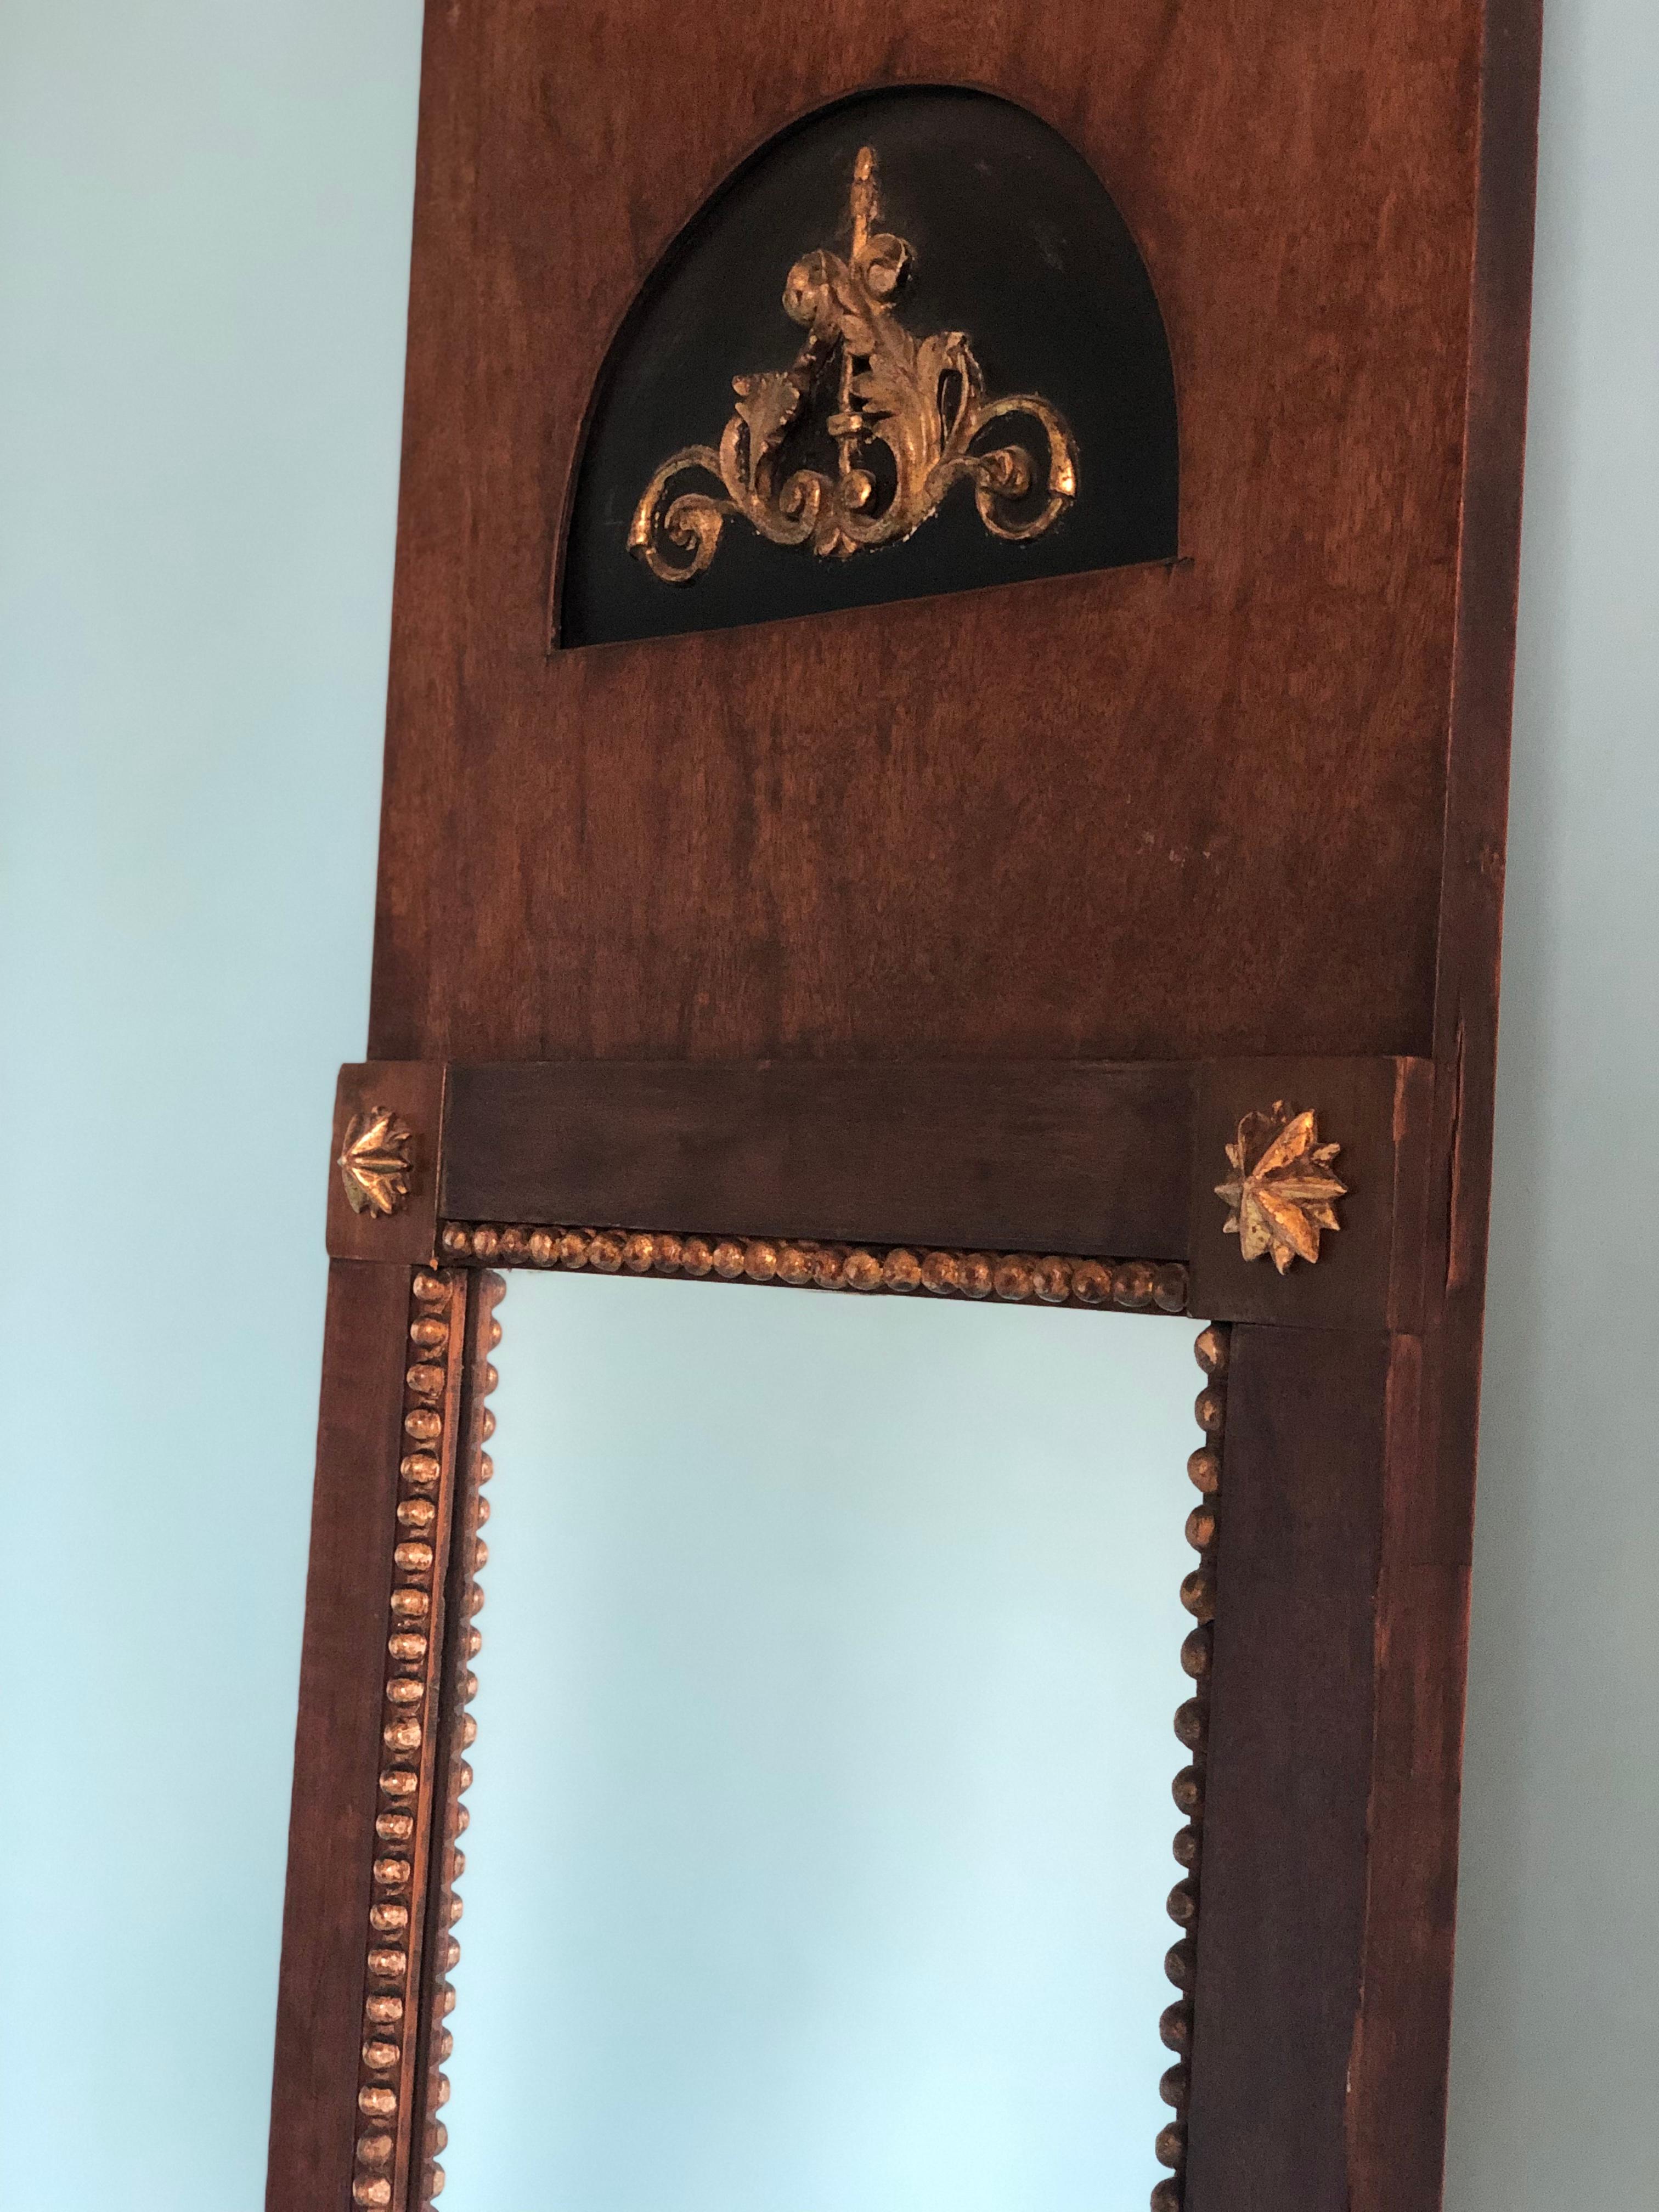 A mahogany and gilded pier mirror from the French Empire, late 19th century. There is a gold-plated pearl rim around the rectangular mirror and a gold-plated flower on the corners. A beautiful ornament at the top.

Beautifully weathered mirror In